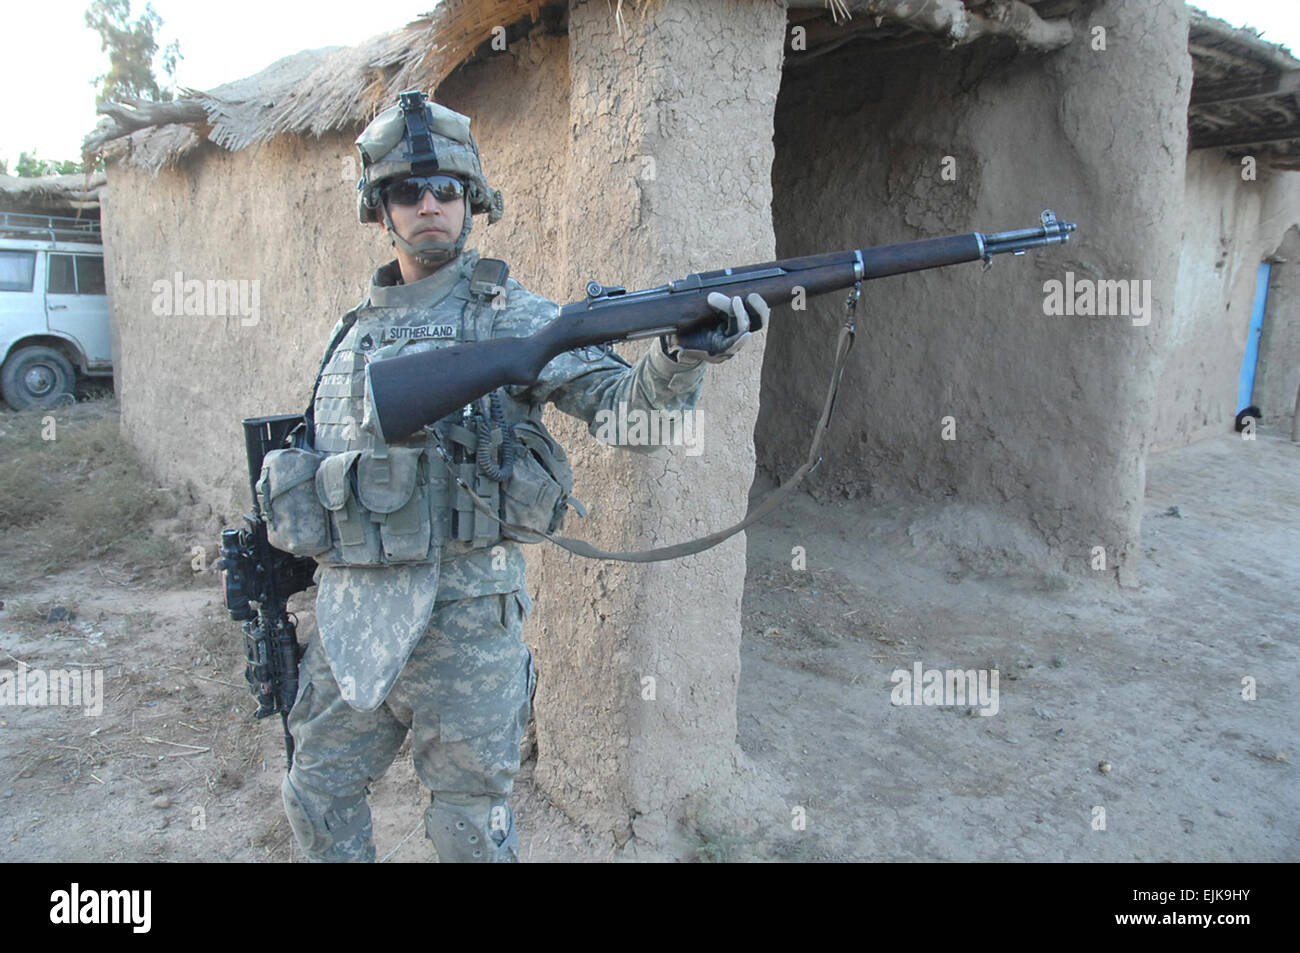 A U.S. Army Soldier displays an M-1 rifle discovered in a suspected insurgent's home in Western Muqdadiyah, Iraq, Dec. 12, 2007. The Soldier is from Alpha Company, 2nd Battalion, 23rd Infantry Regiment, 3rd Brigade Combat Team, 2nd Infantry Division.  Spc. Shawn M. Cassatt Stock Photo